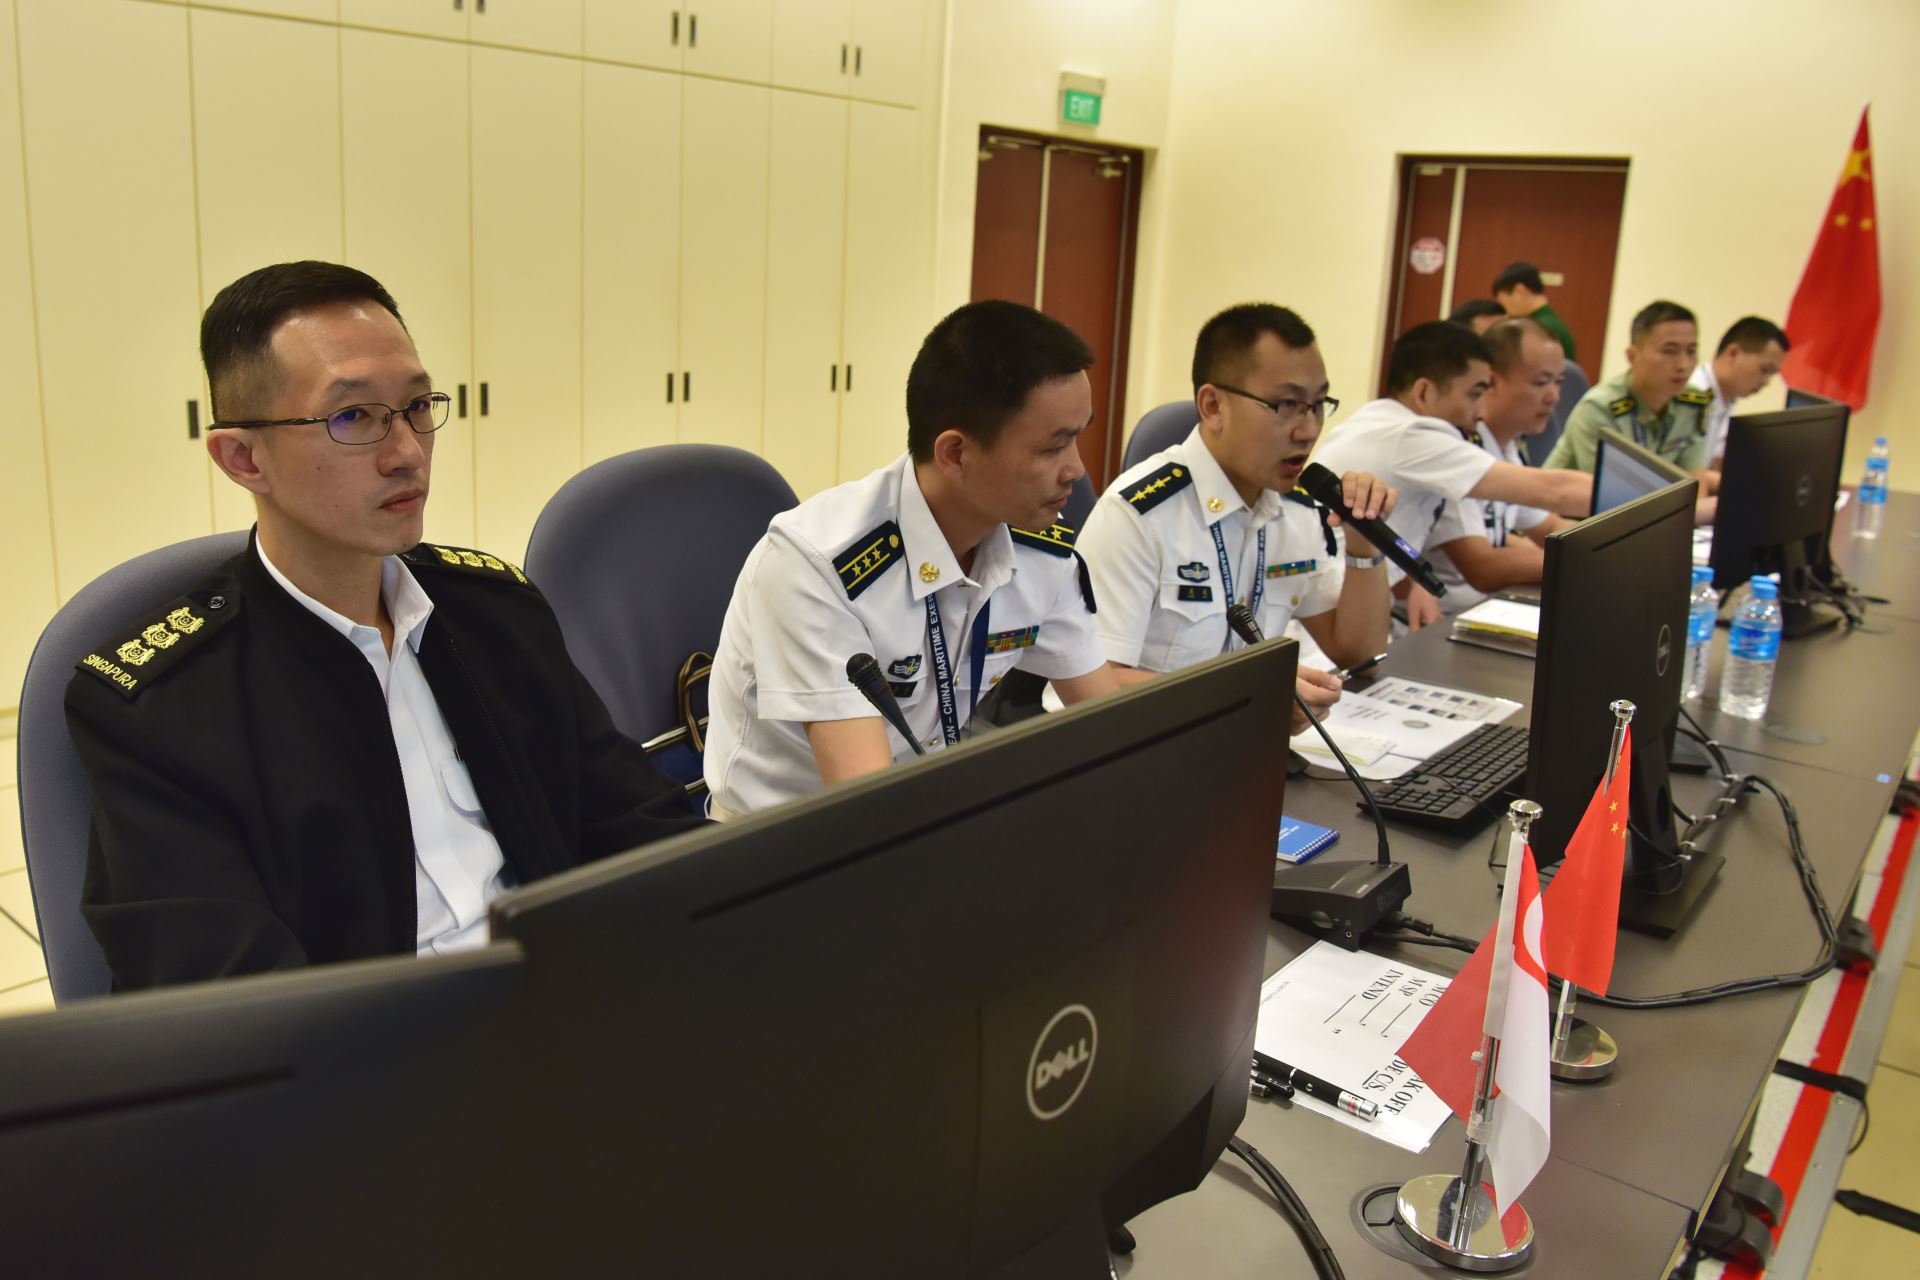 Commander 185 SQN, COL Lim Yu Chuan and Deputy Chief of Operations, Naval Forces of People's Liberation Army Southern Theater Command, CAPT Liang Zhijia co-directing the inaugural ASEAN-China Maritime TTX at the MOEC.